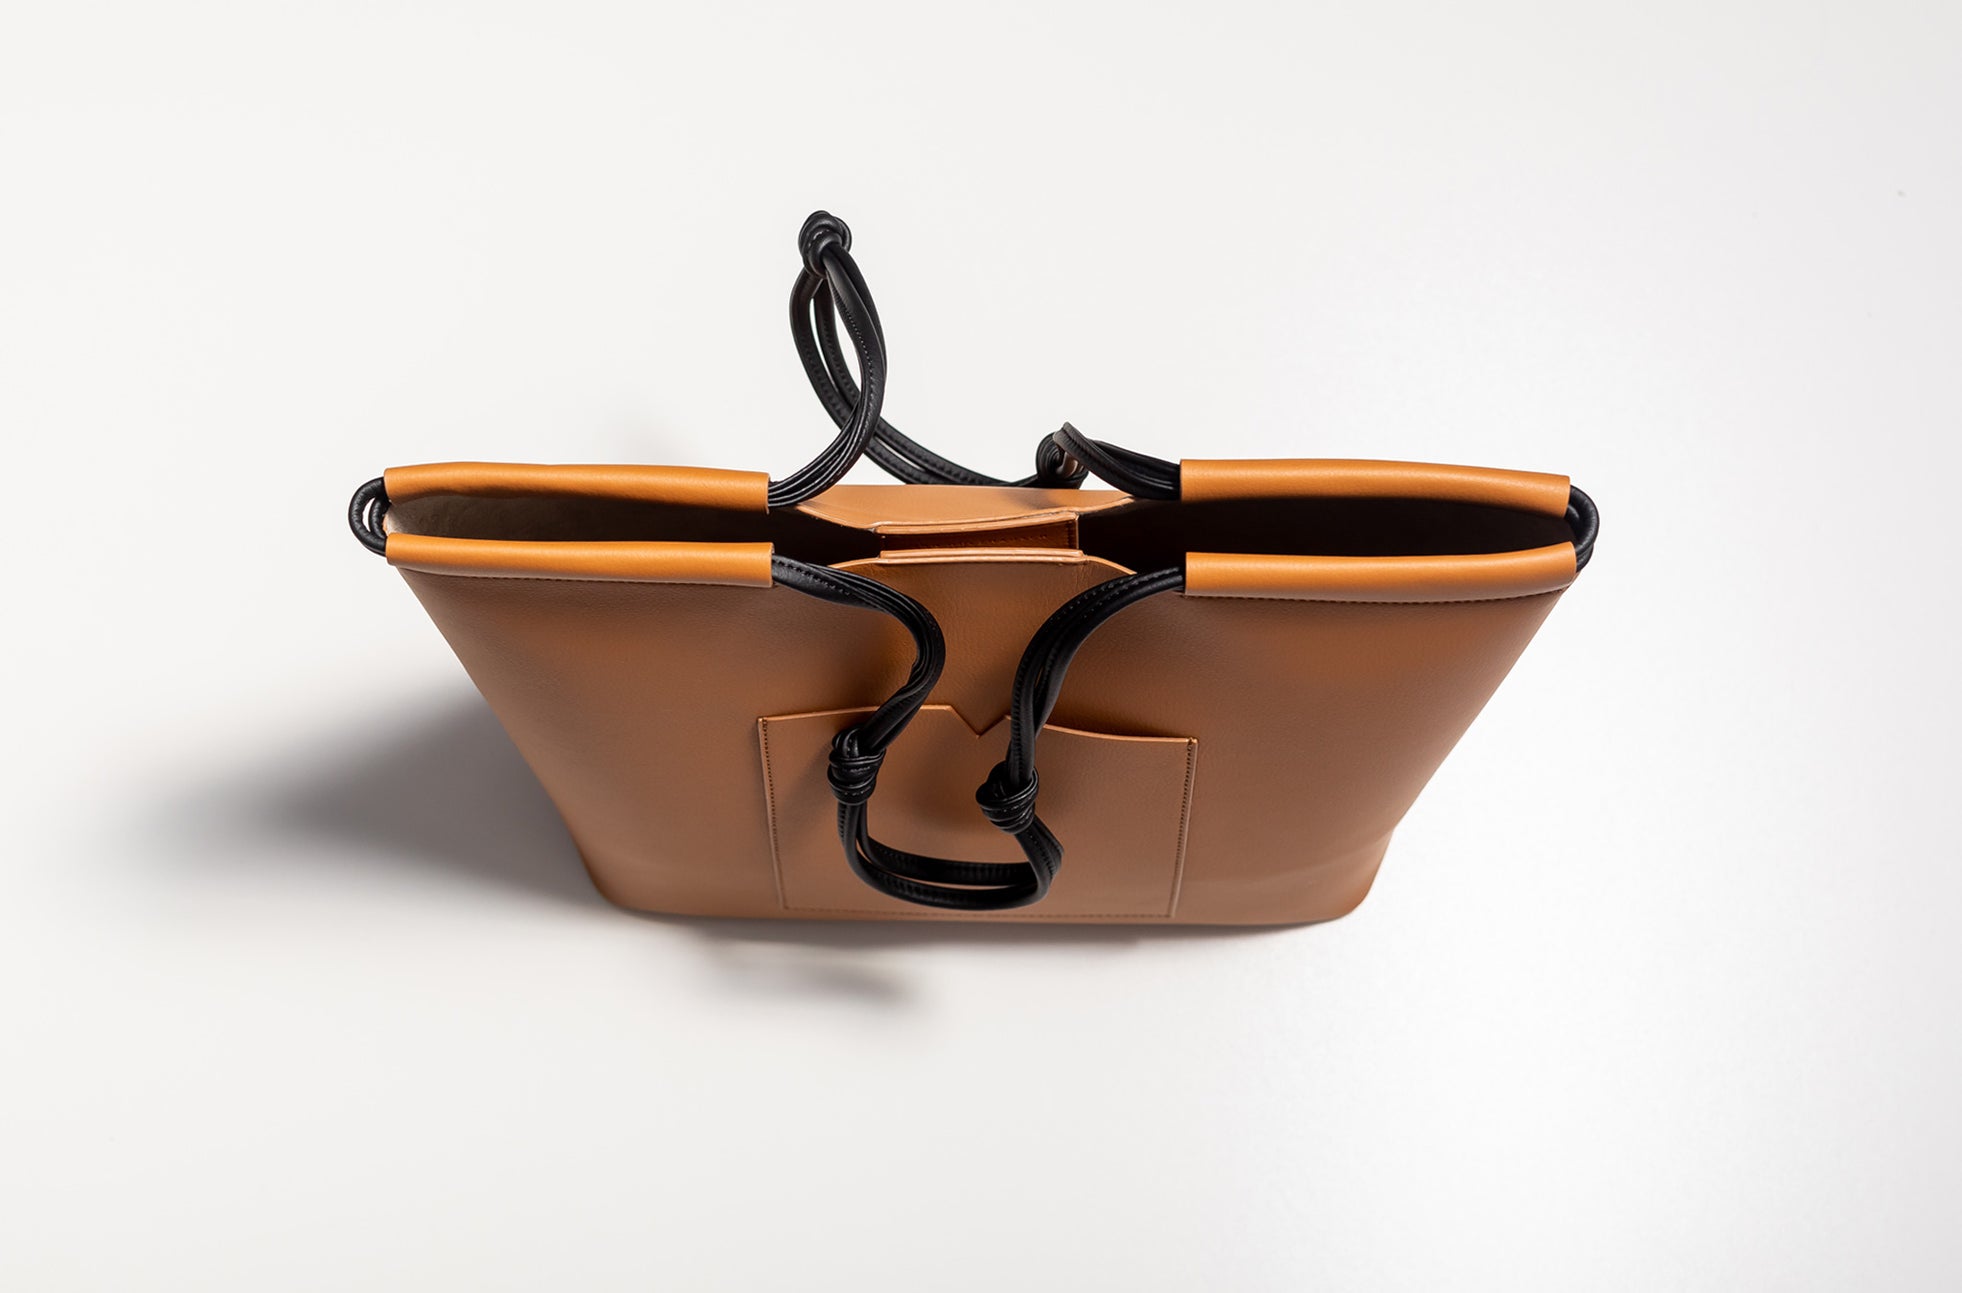 The Market Tote in Technik-Leather in Caramel and Black image 11